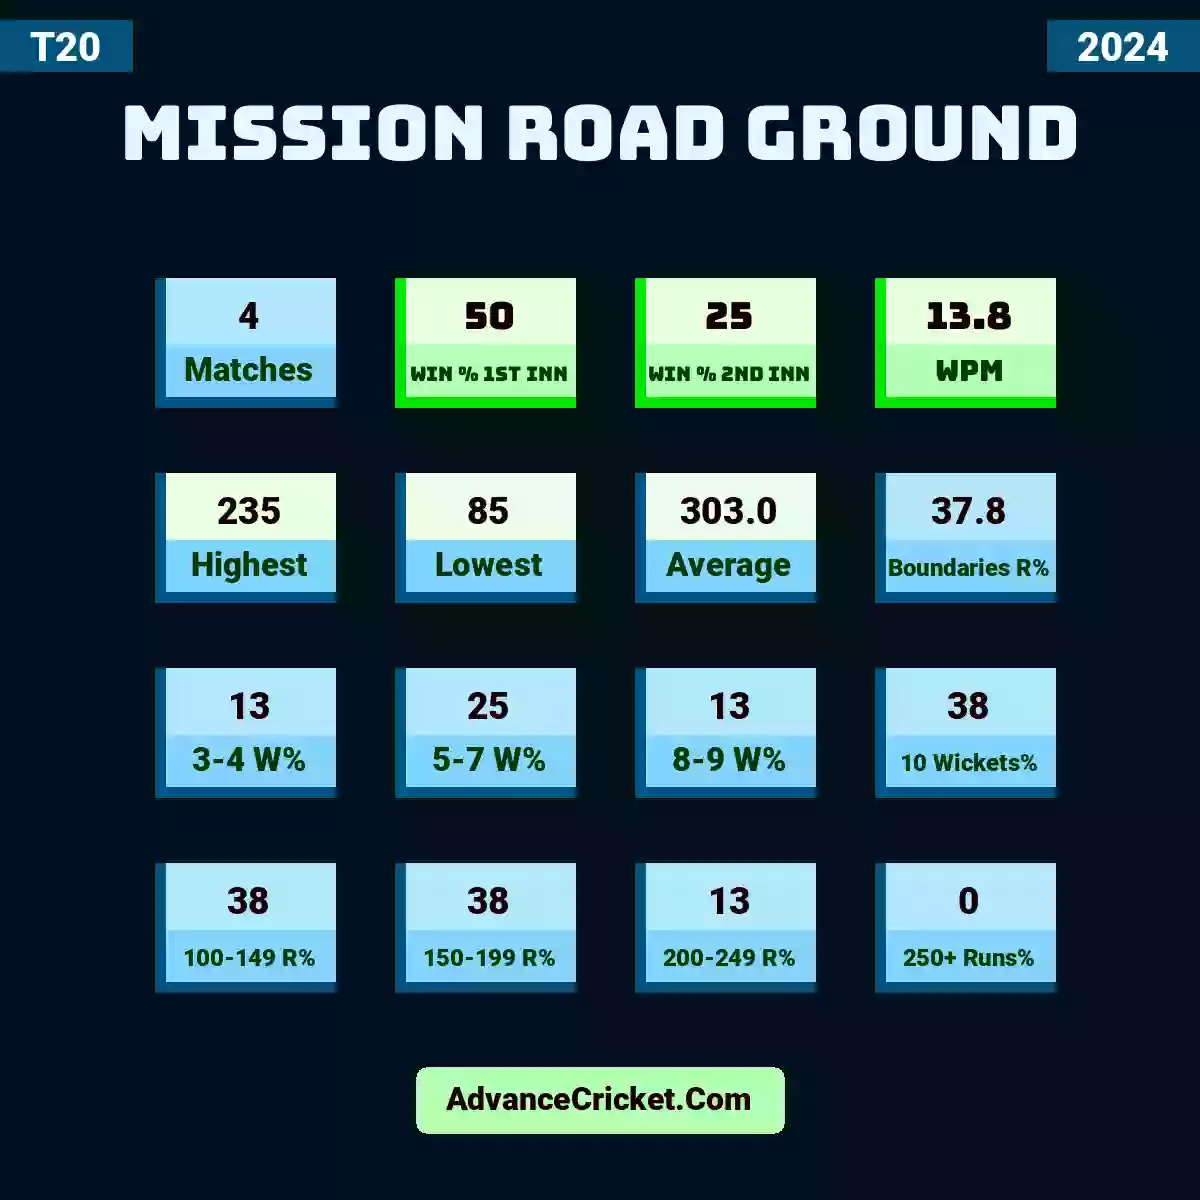 Image showing Mission Road Ground with Matches: 4, Win % 1st Inn: 50, Win % 2nd Inn: 25, WPM: 13.8, Highest: 235, Lowest: 85, Average: 303.0, Boundaries R%: 37.8, 3-4 W%: 13, 5-7 W%: 25, 8-9 W%: 13, 10 Wickets%: 38, 100-149 R%: 38, 150-199 R%: 38, 200-249 R%: 13, 250+ Runs%: 0.